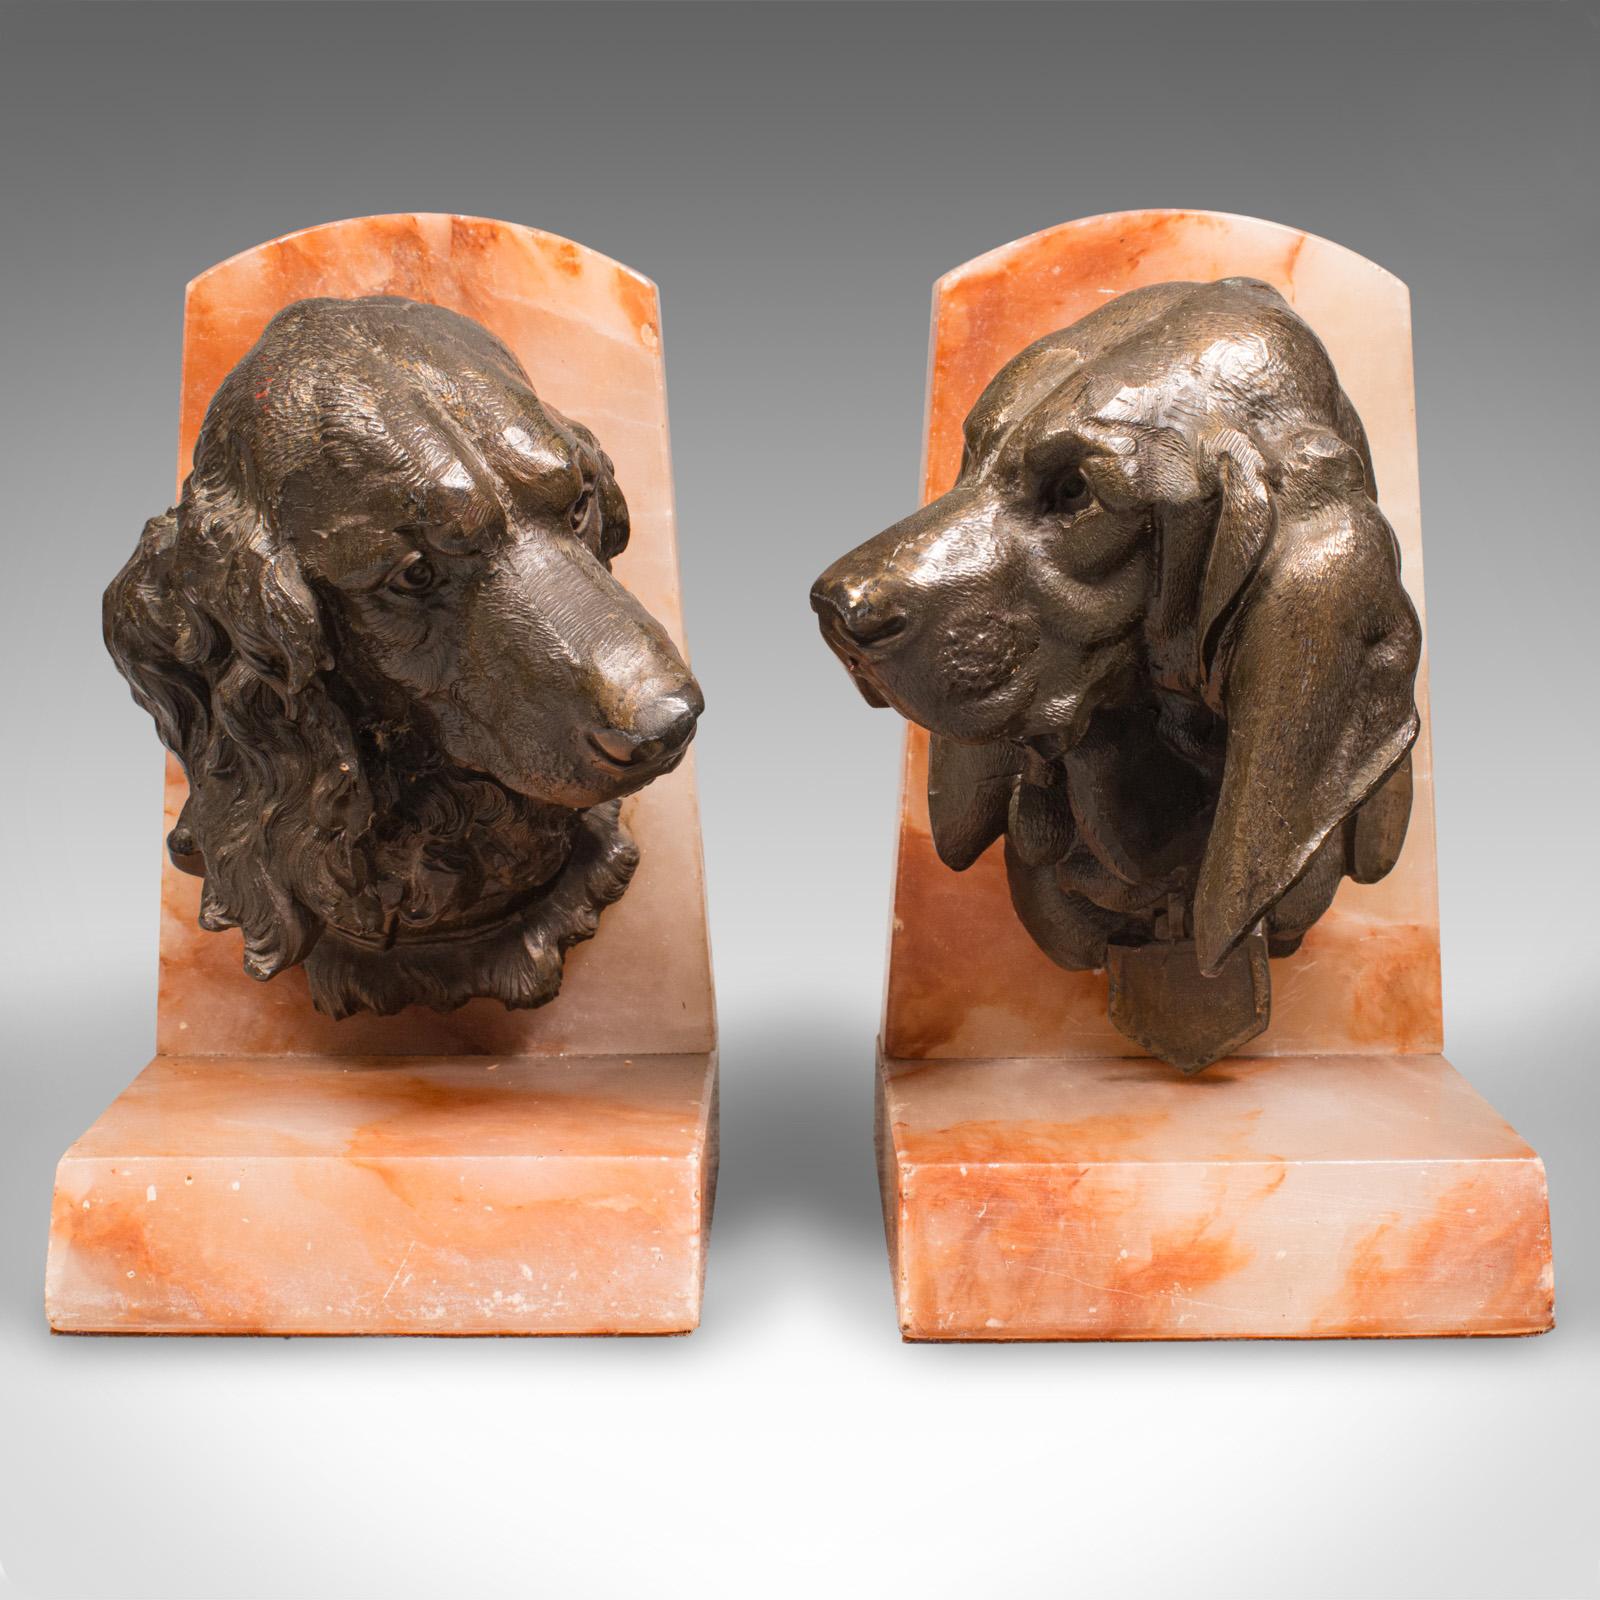 This is a pair of antique animalier bookends. A French, spelter bronze dog bust mounted upon red onyx by Prosper Lecourtier (1851-1924), dating to the late Victorian period, circa 1900.

Striking decorative appeal from one of the 19th century's